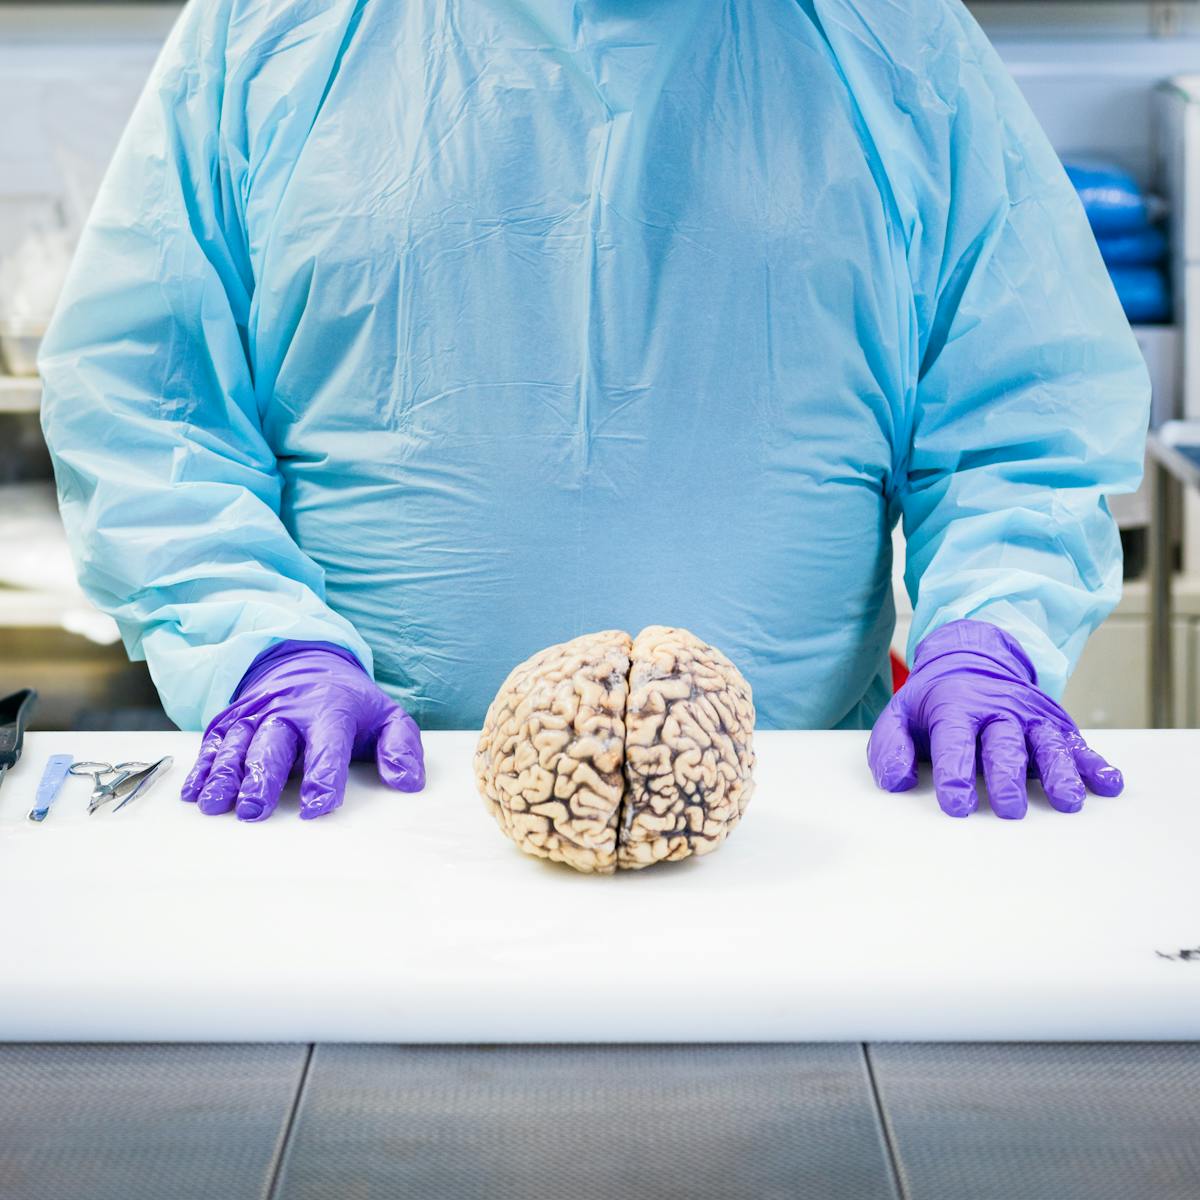 Photograph of a Neuropathologist stood at a dissection table, purple gloved hands resting palms down on a white chopping board. Between their hands is a donated human brain awaiting dissection. 